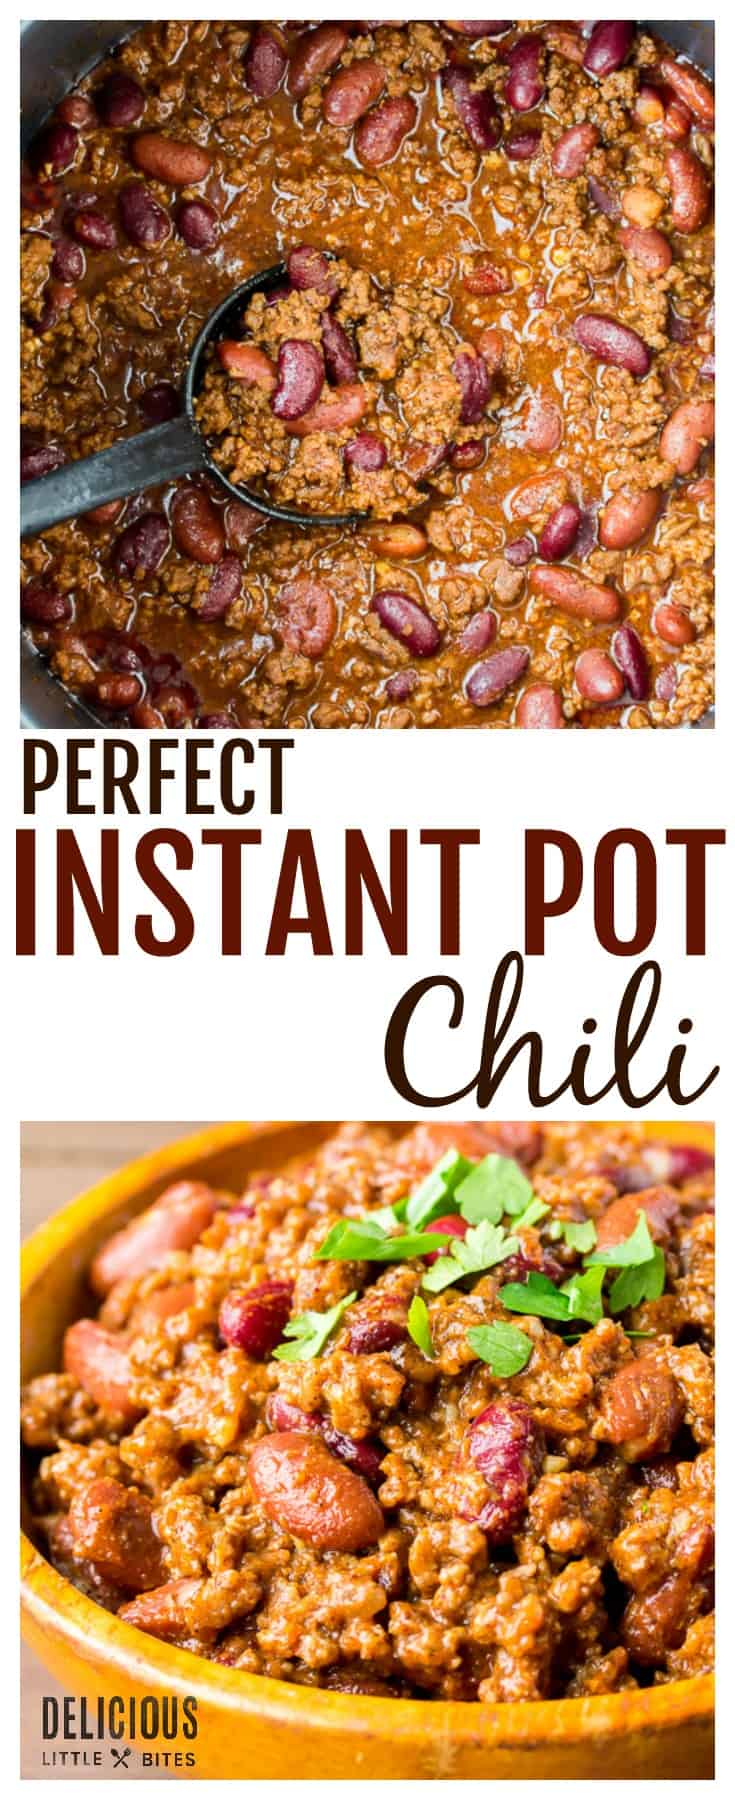 Instant Pot Smoky Beef Chili - Delicious Little Bites